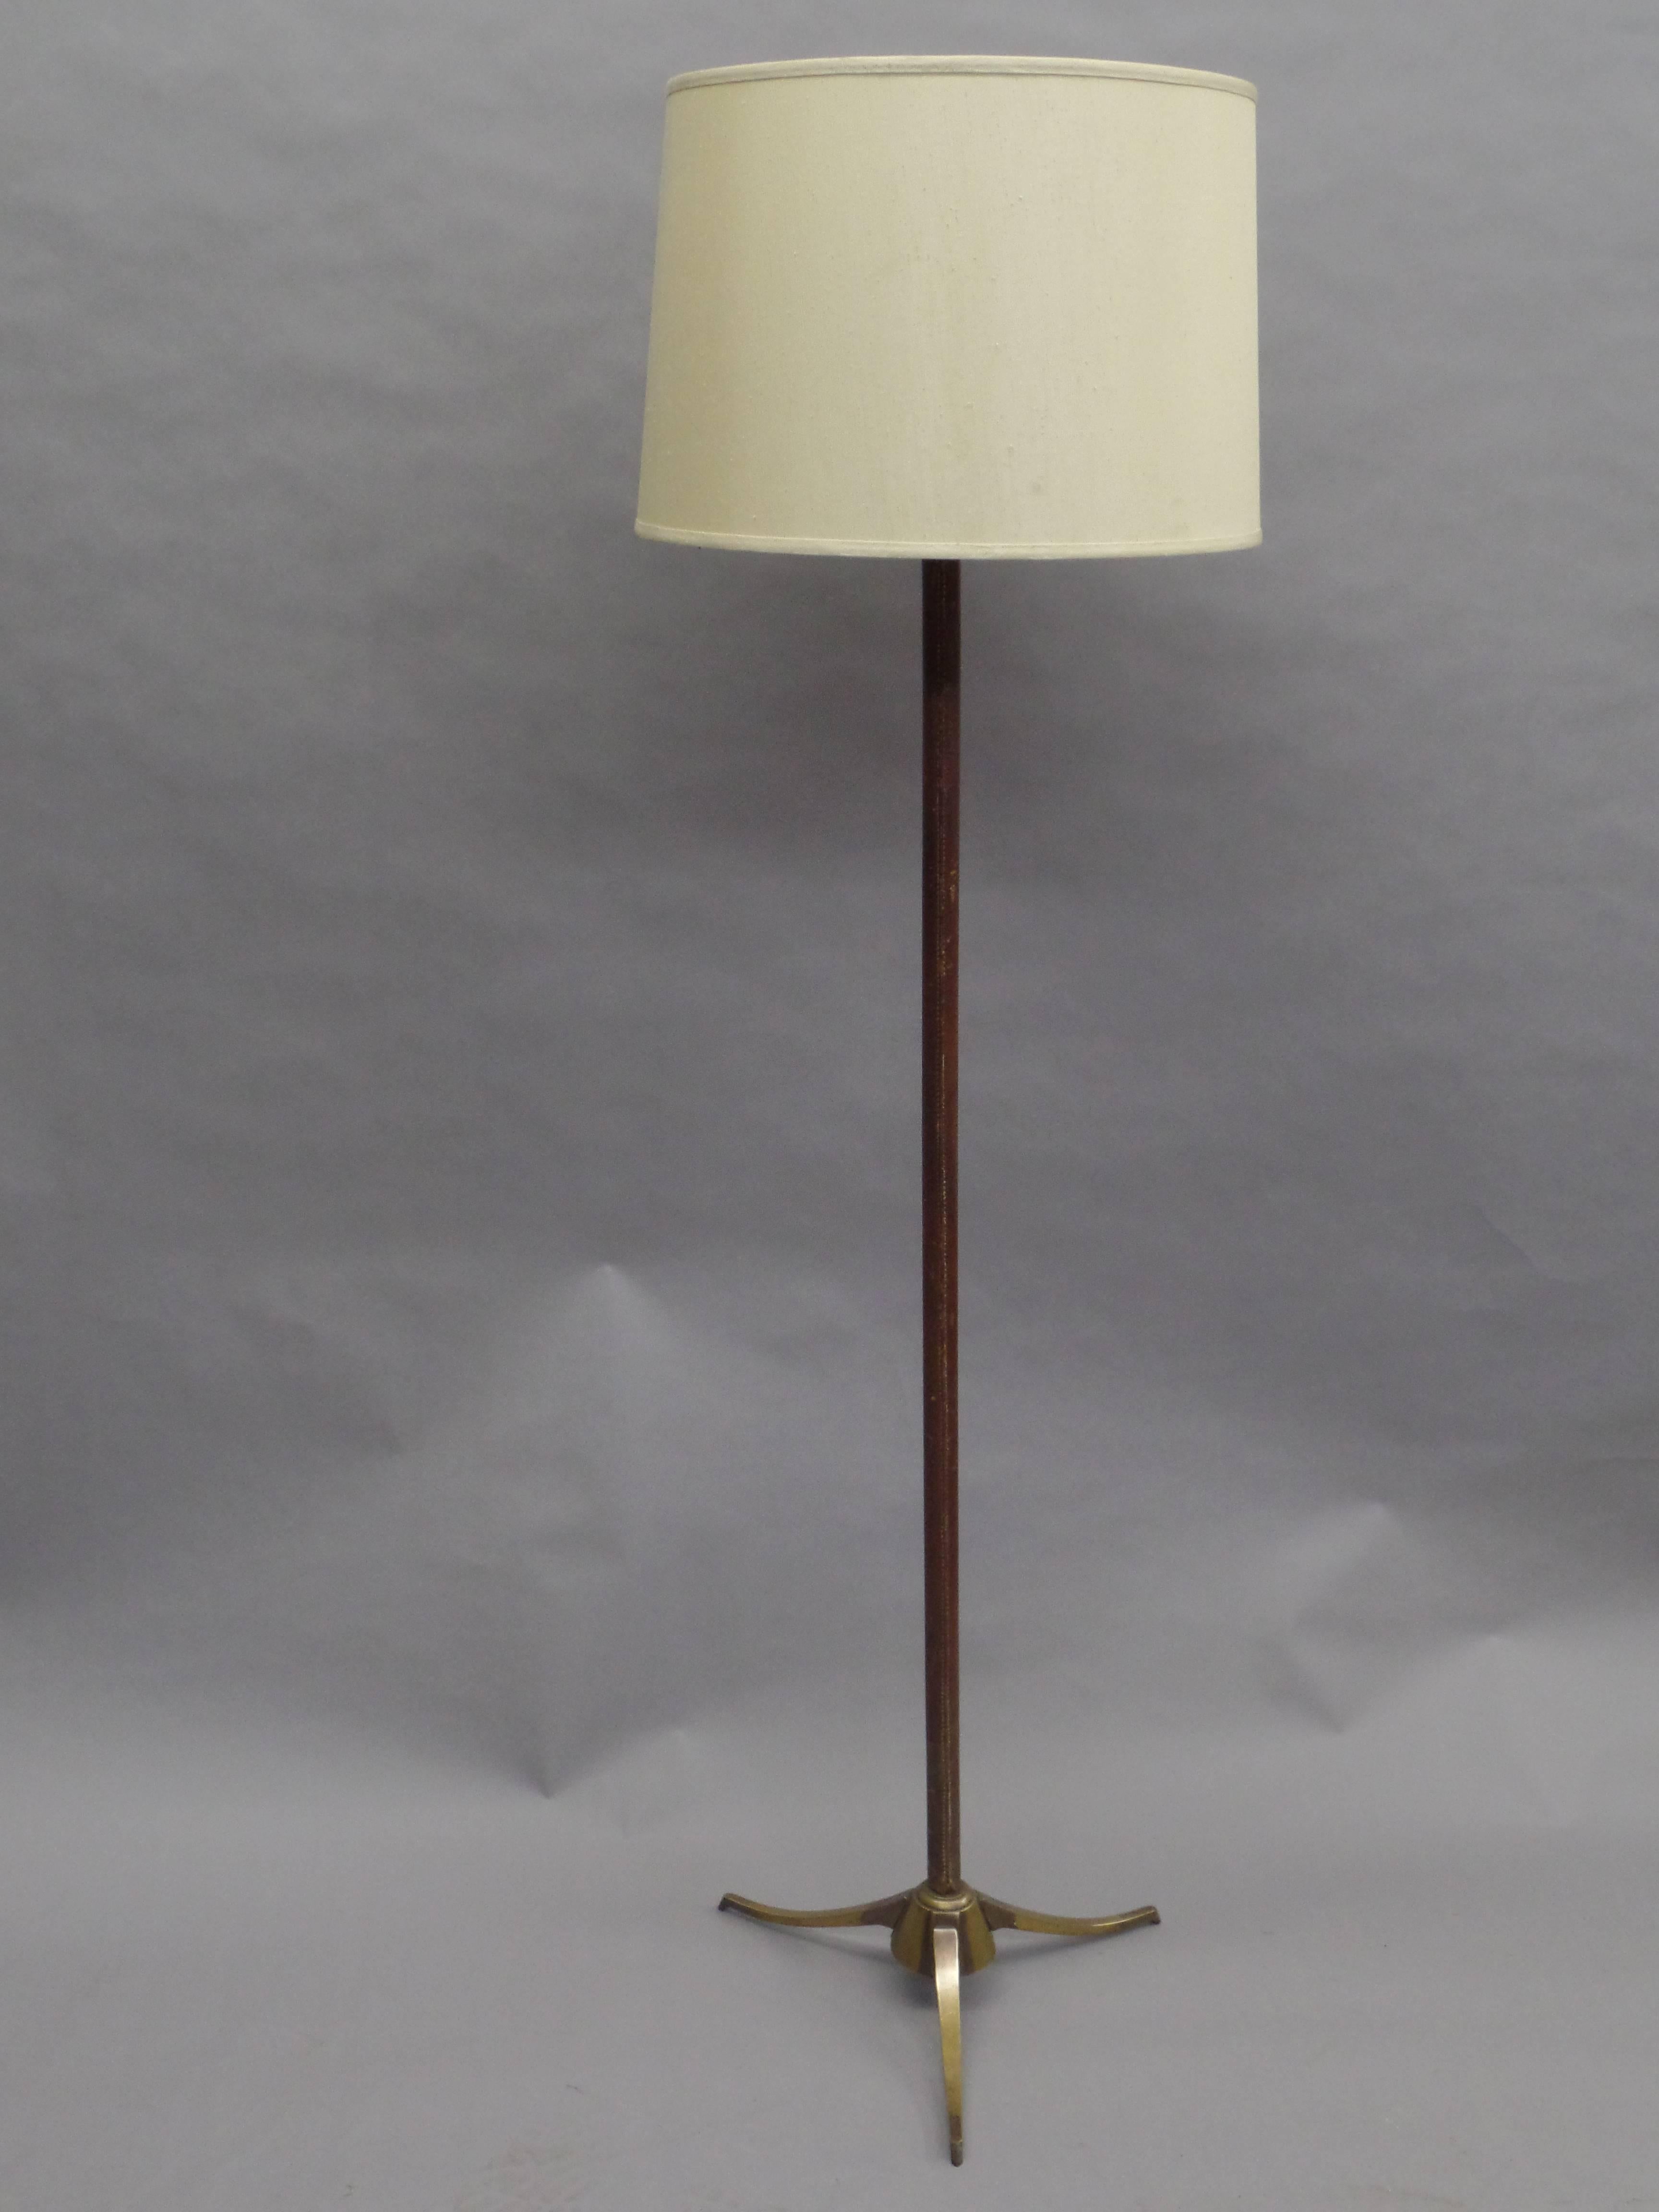 Elegant French Mid-Century Modern neoclassical handstitched leather standing lamp in the style of Jacques Adnet.

The tripod base is in solid brass and reflects French Art Deco, modern and neoclassical influences. Leather is delicately